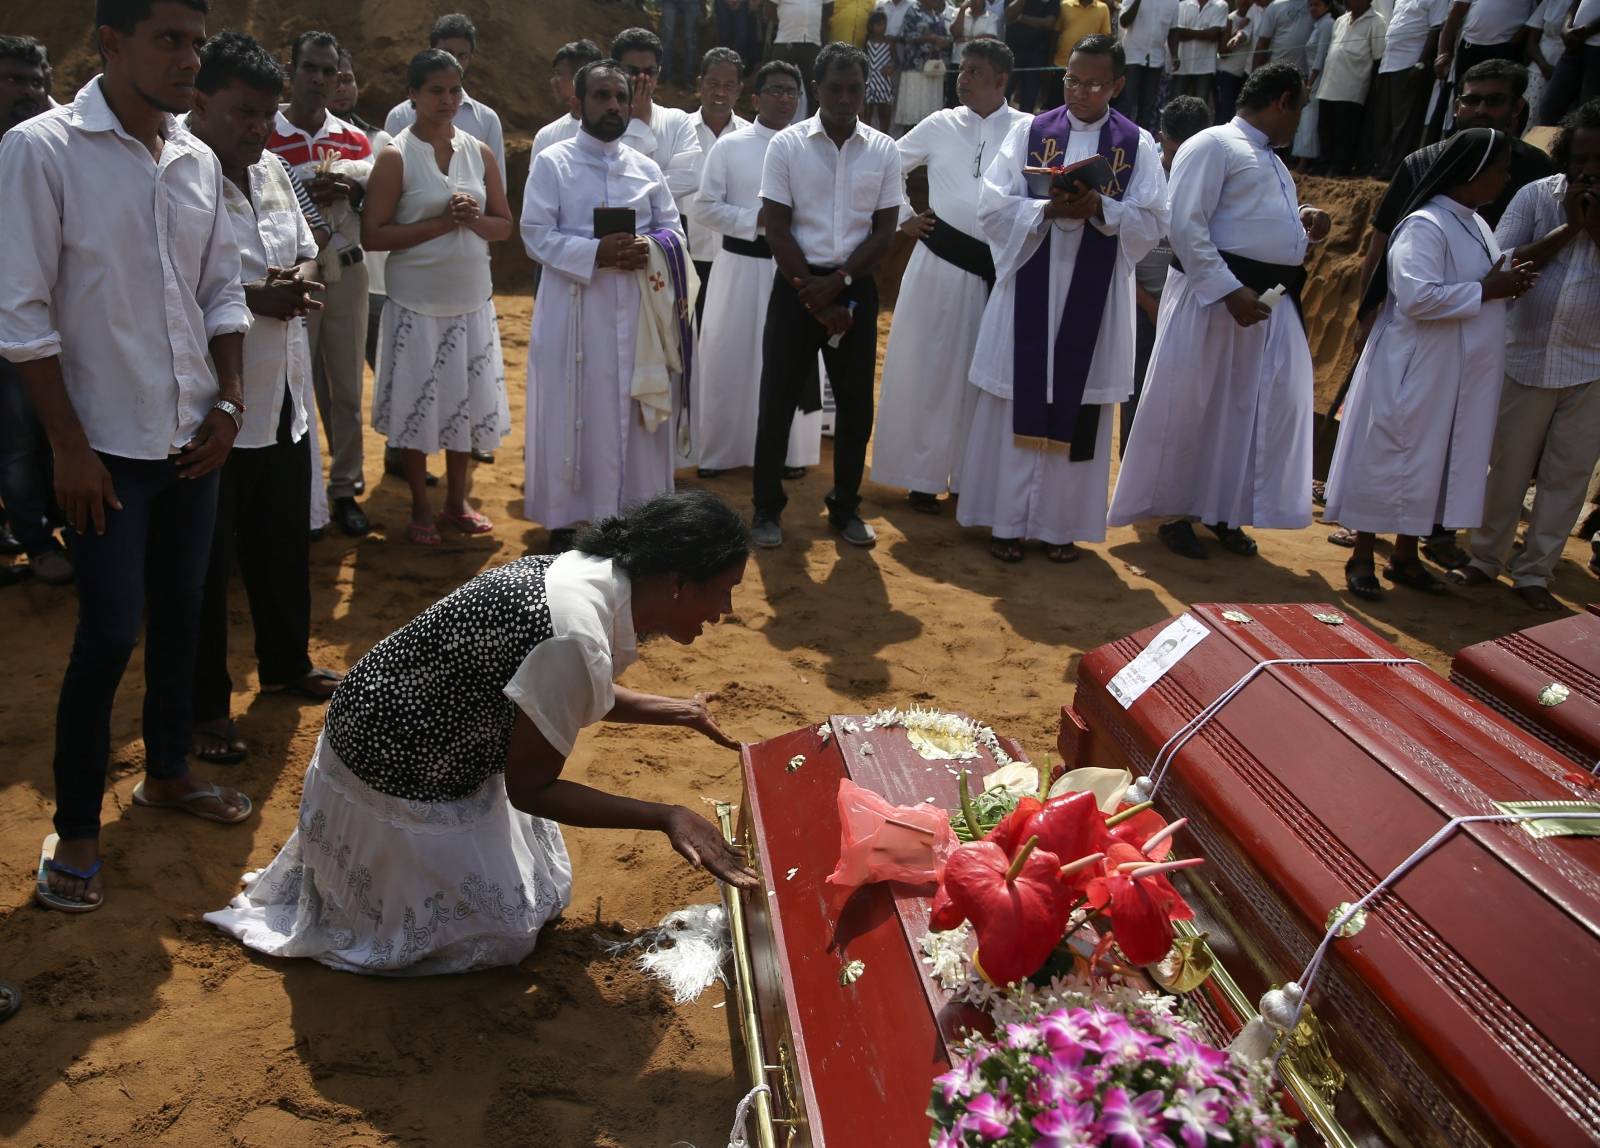 A woman reacts next to a coffin during a mass burial of victims at a cemetery near St. Sebastian Church in Negombo